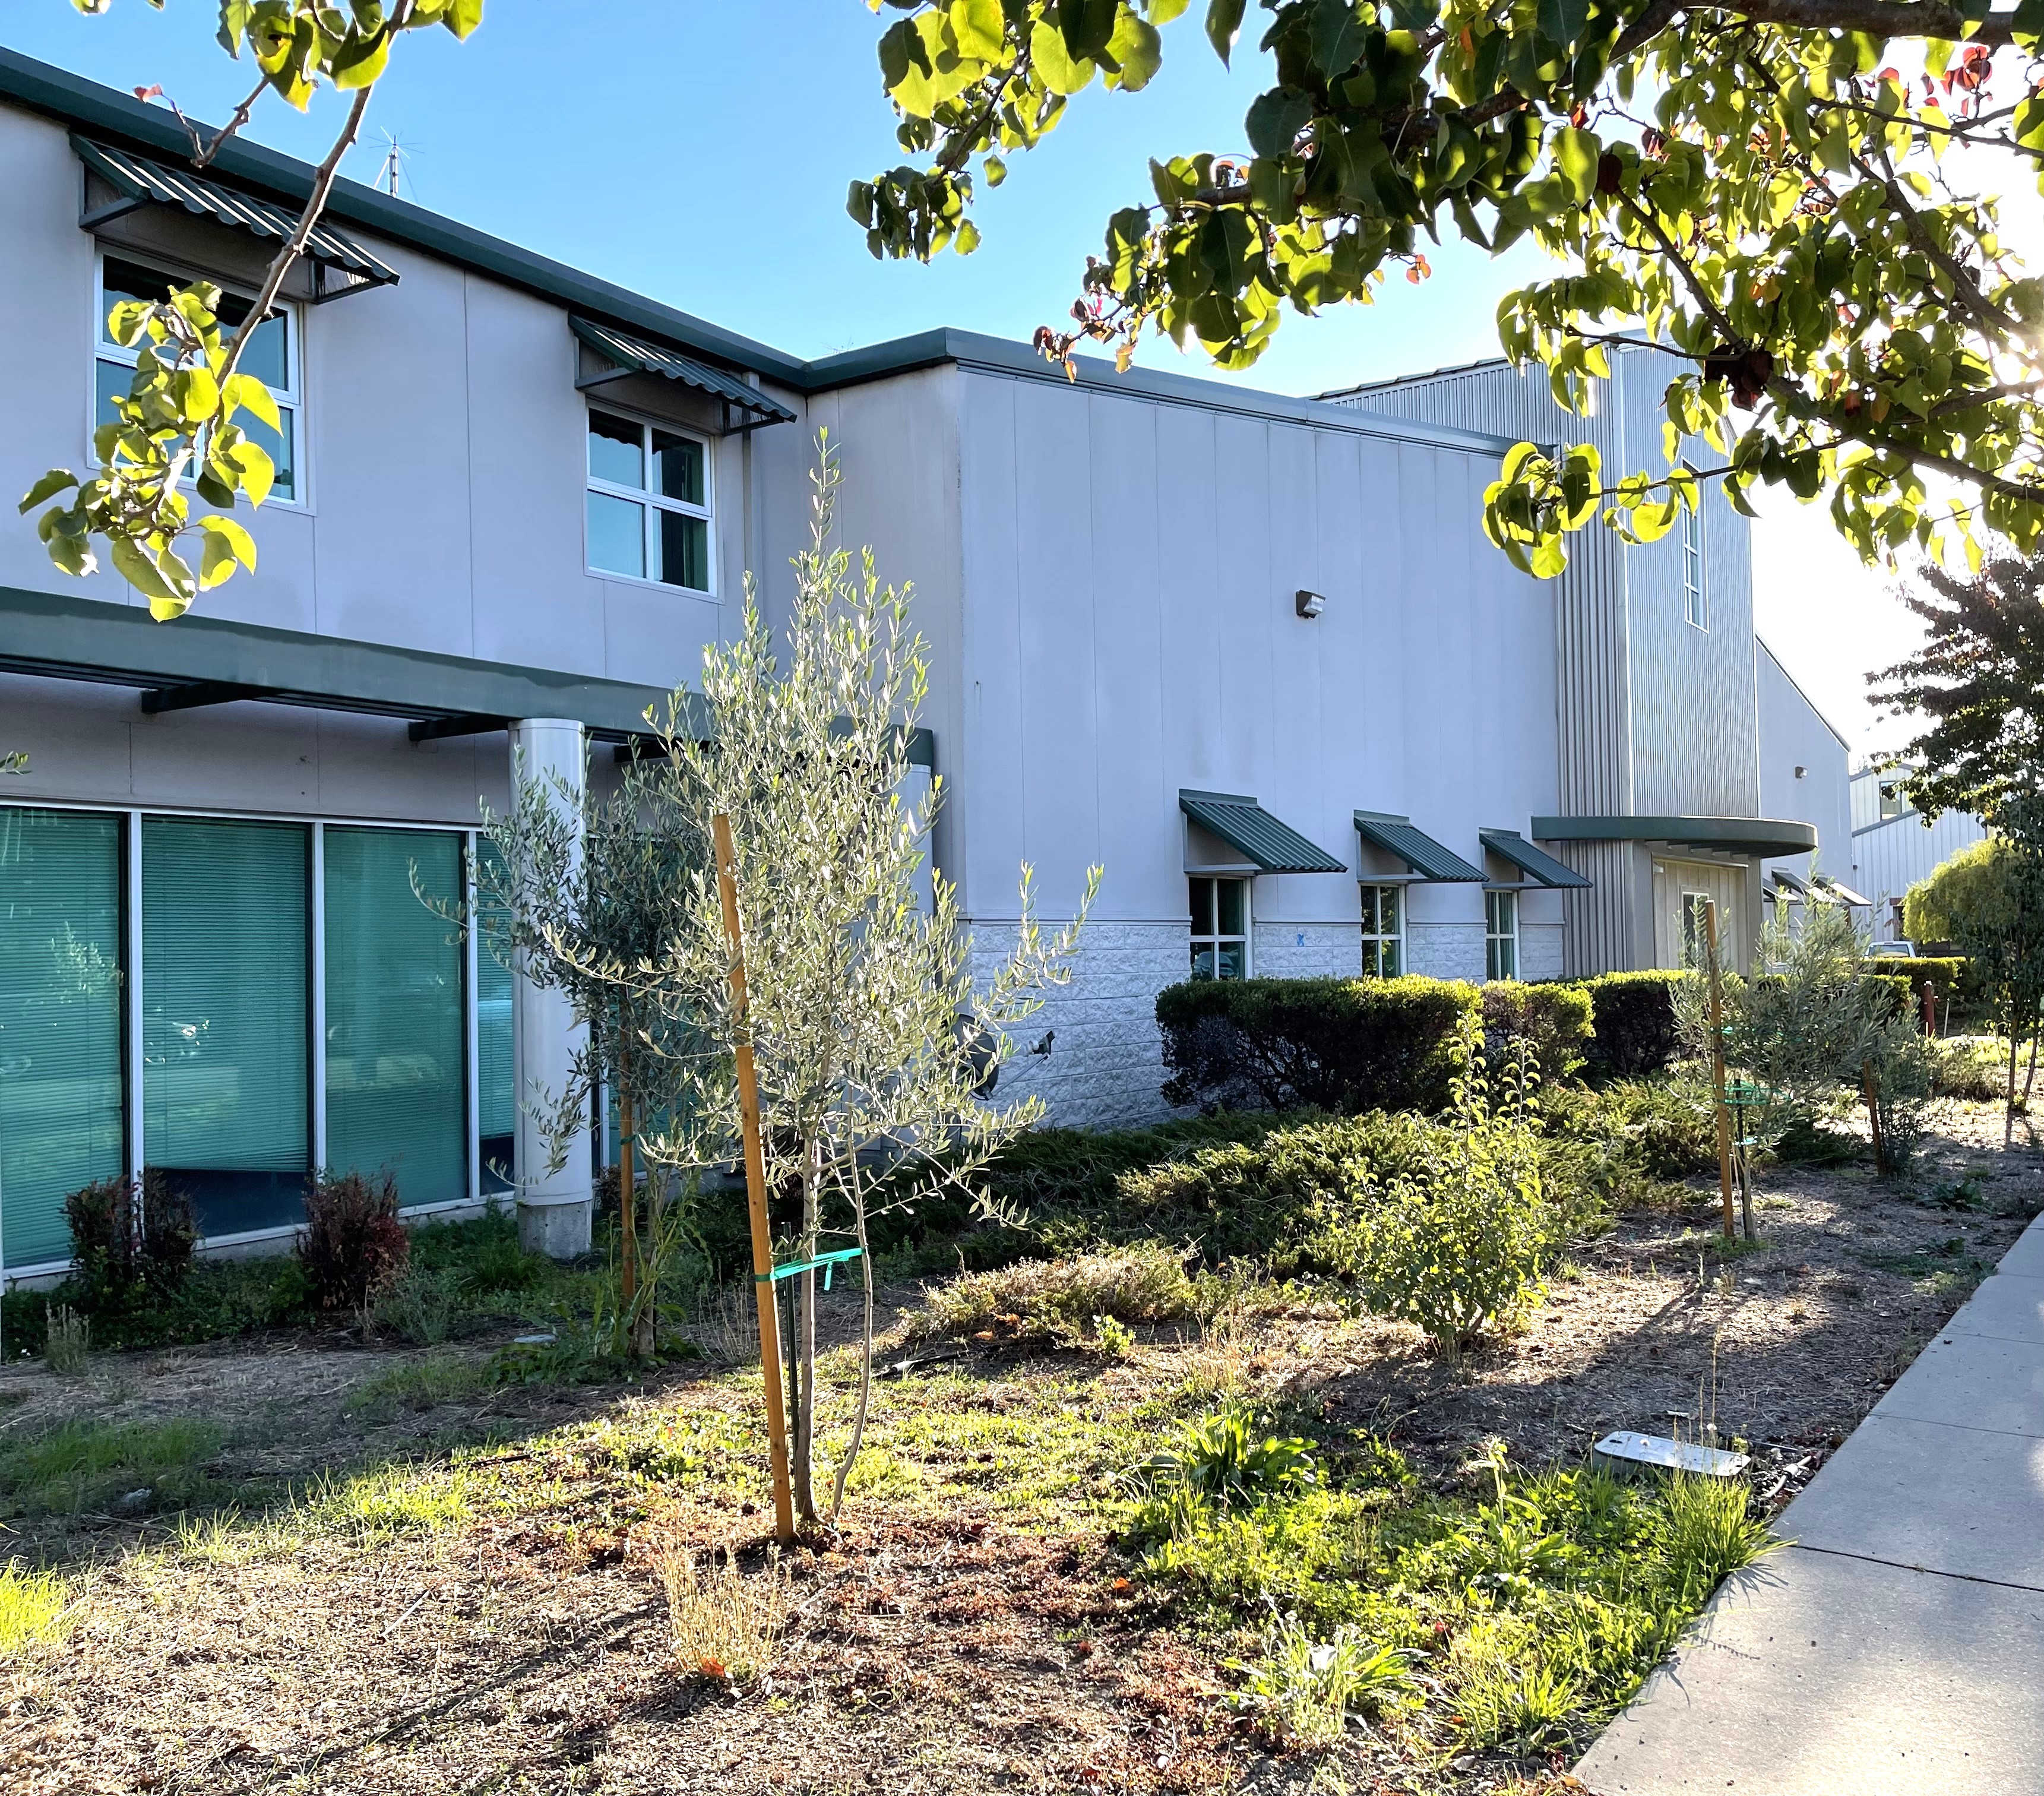 View of the side of SERVPRO office  in  Petaluma/Rohnert Park/Santa Rosa, located at 373 Blodgett St in Cotati, California. It is situated in an industrial neighborhood and provides damage restoration services to the surrounding community.